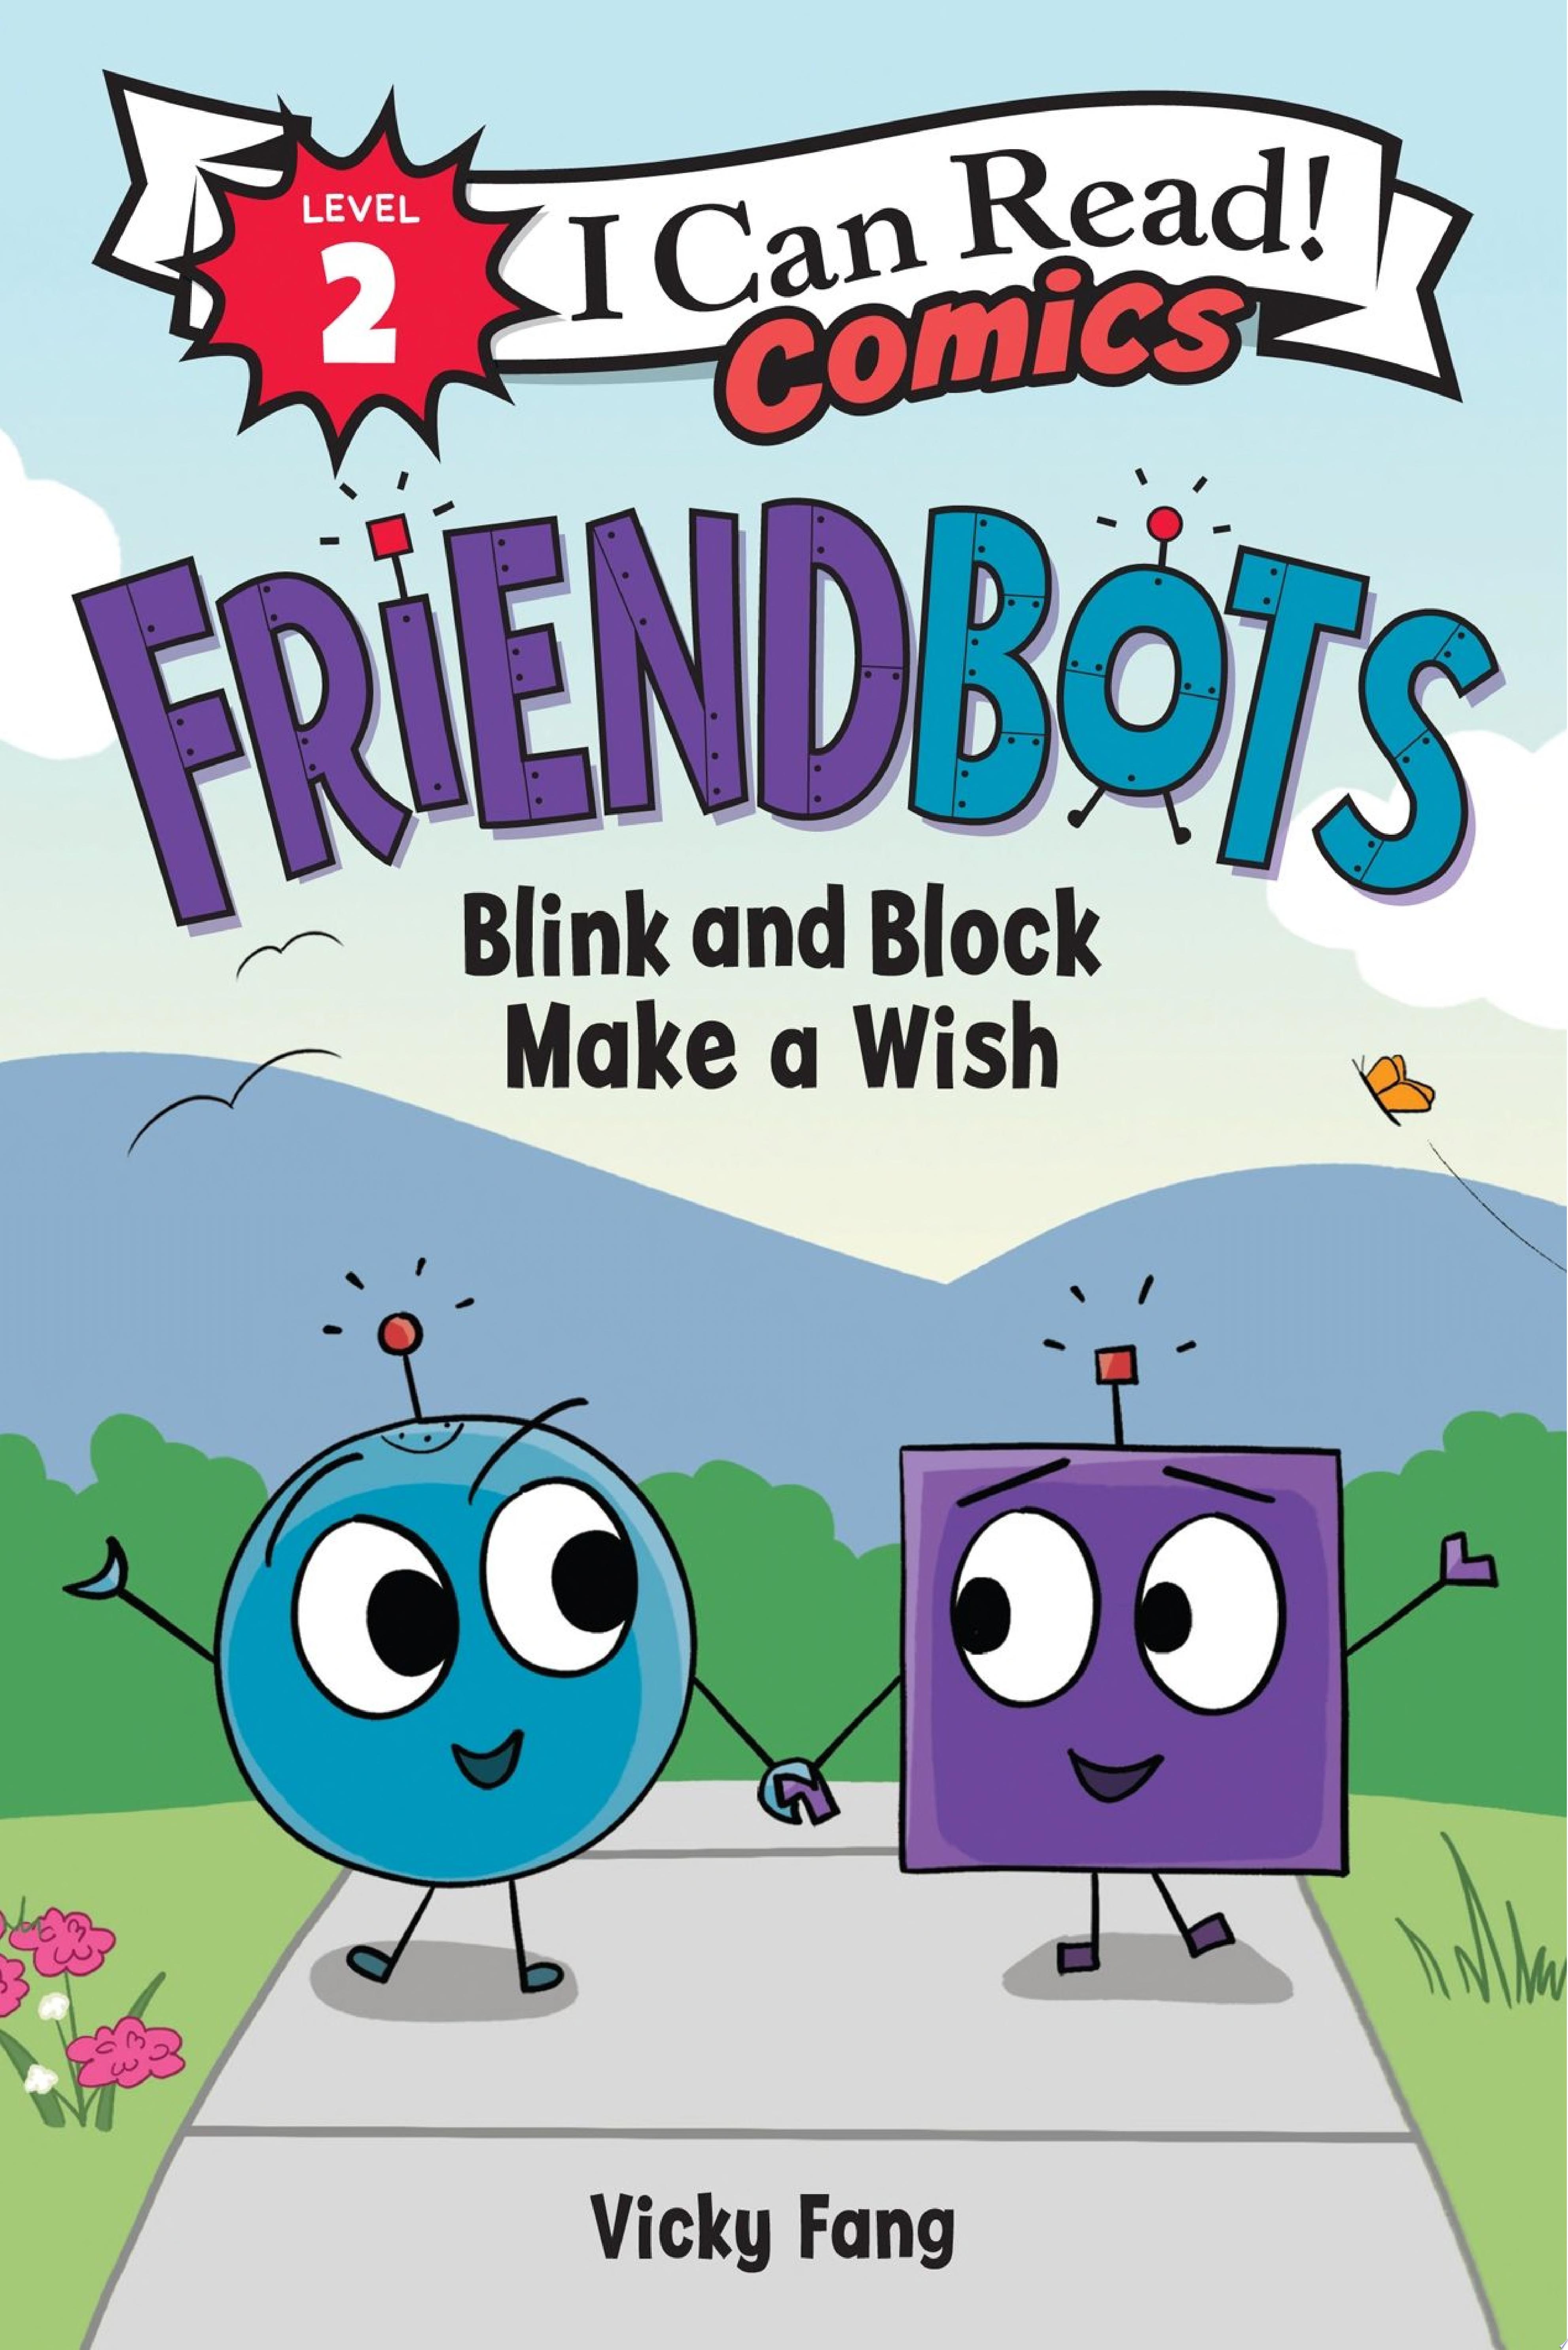 Image for "Friendbots: Blink and Block Make a Wish"